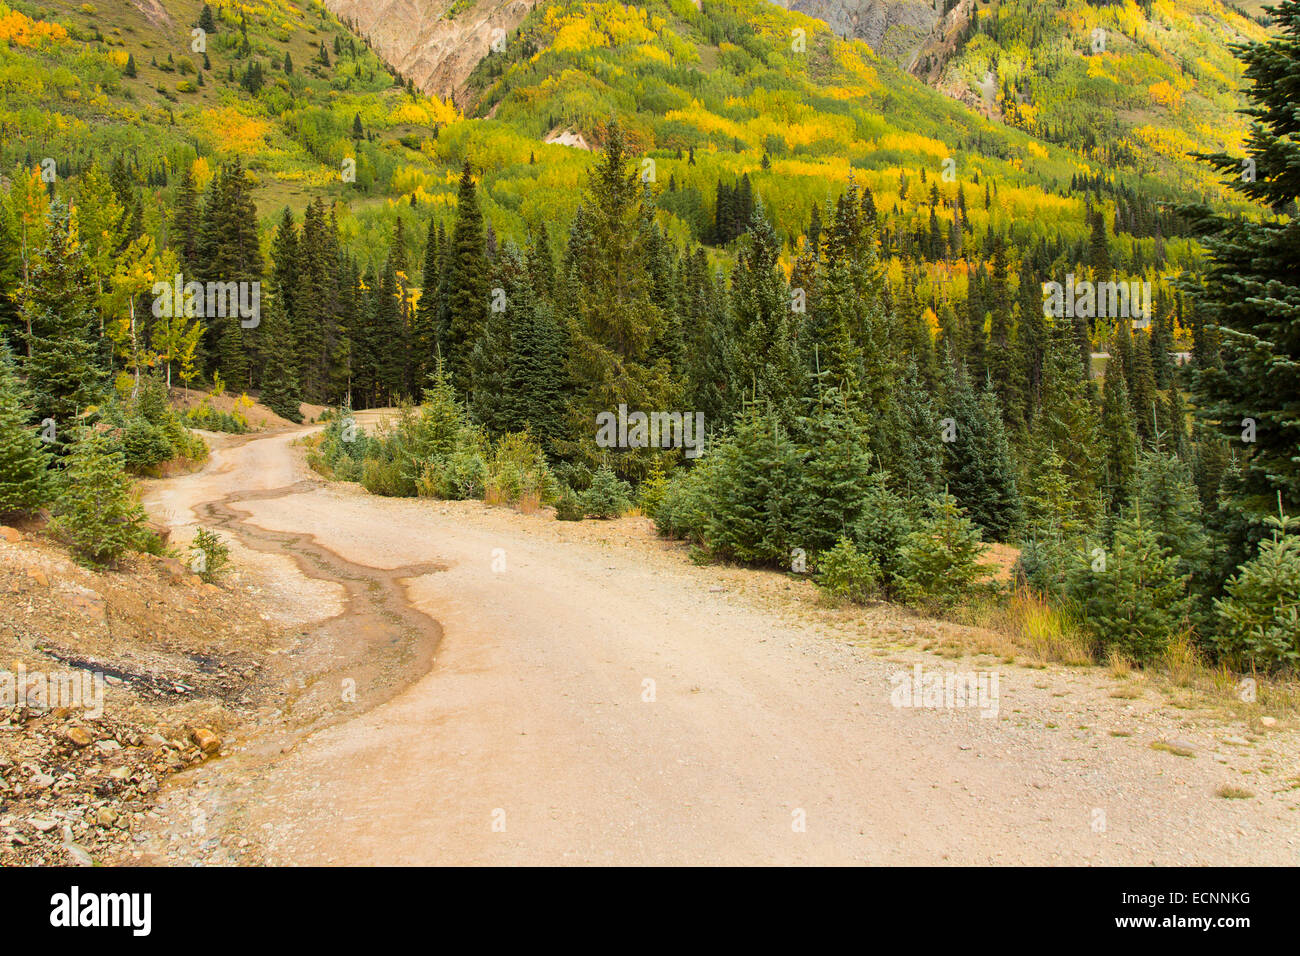 Fall in the Rocky Mountains off Route 550, The Million Dollar Highway in the Ouray, Silverton area of Colorado Stock Photo